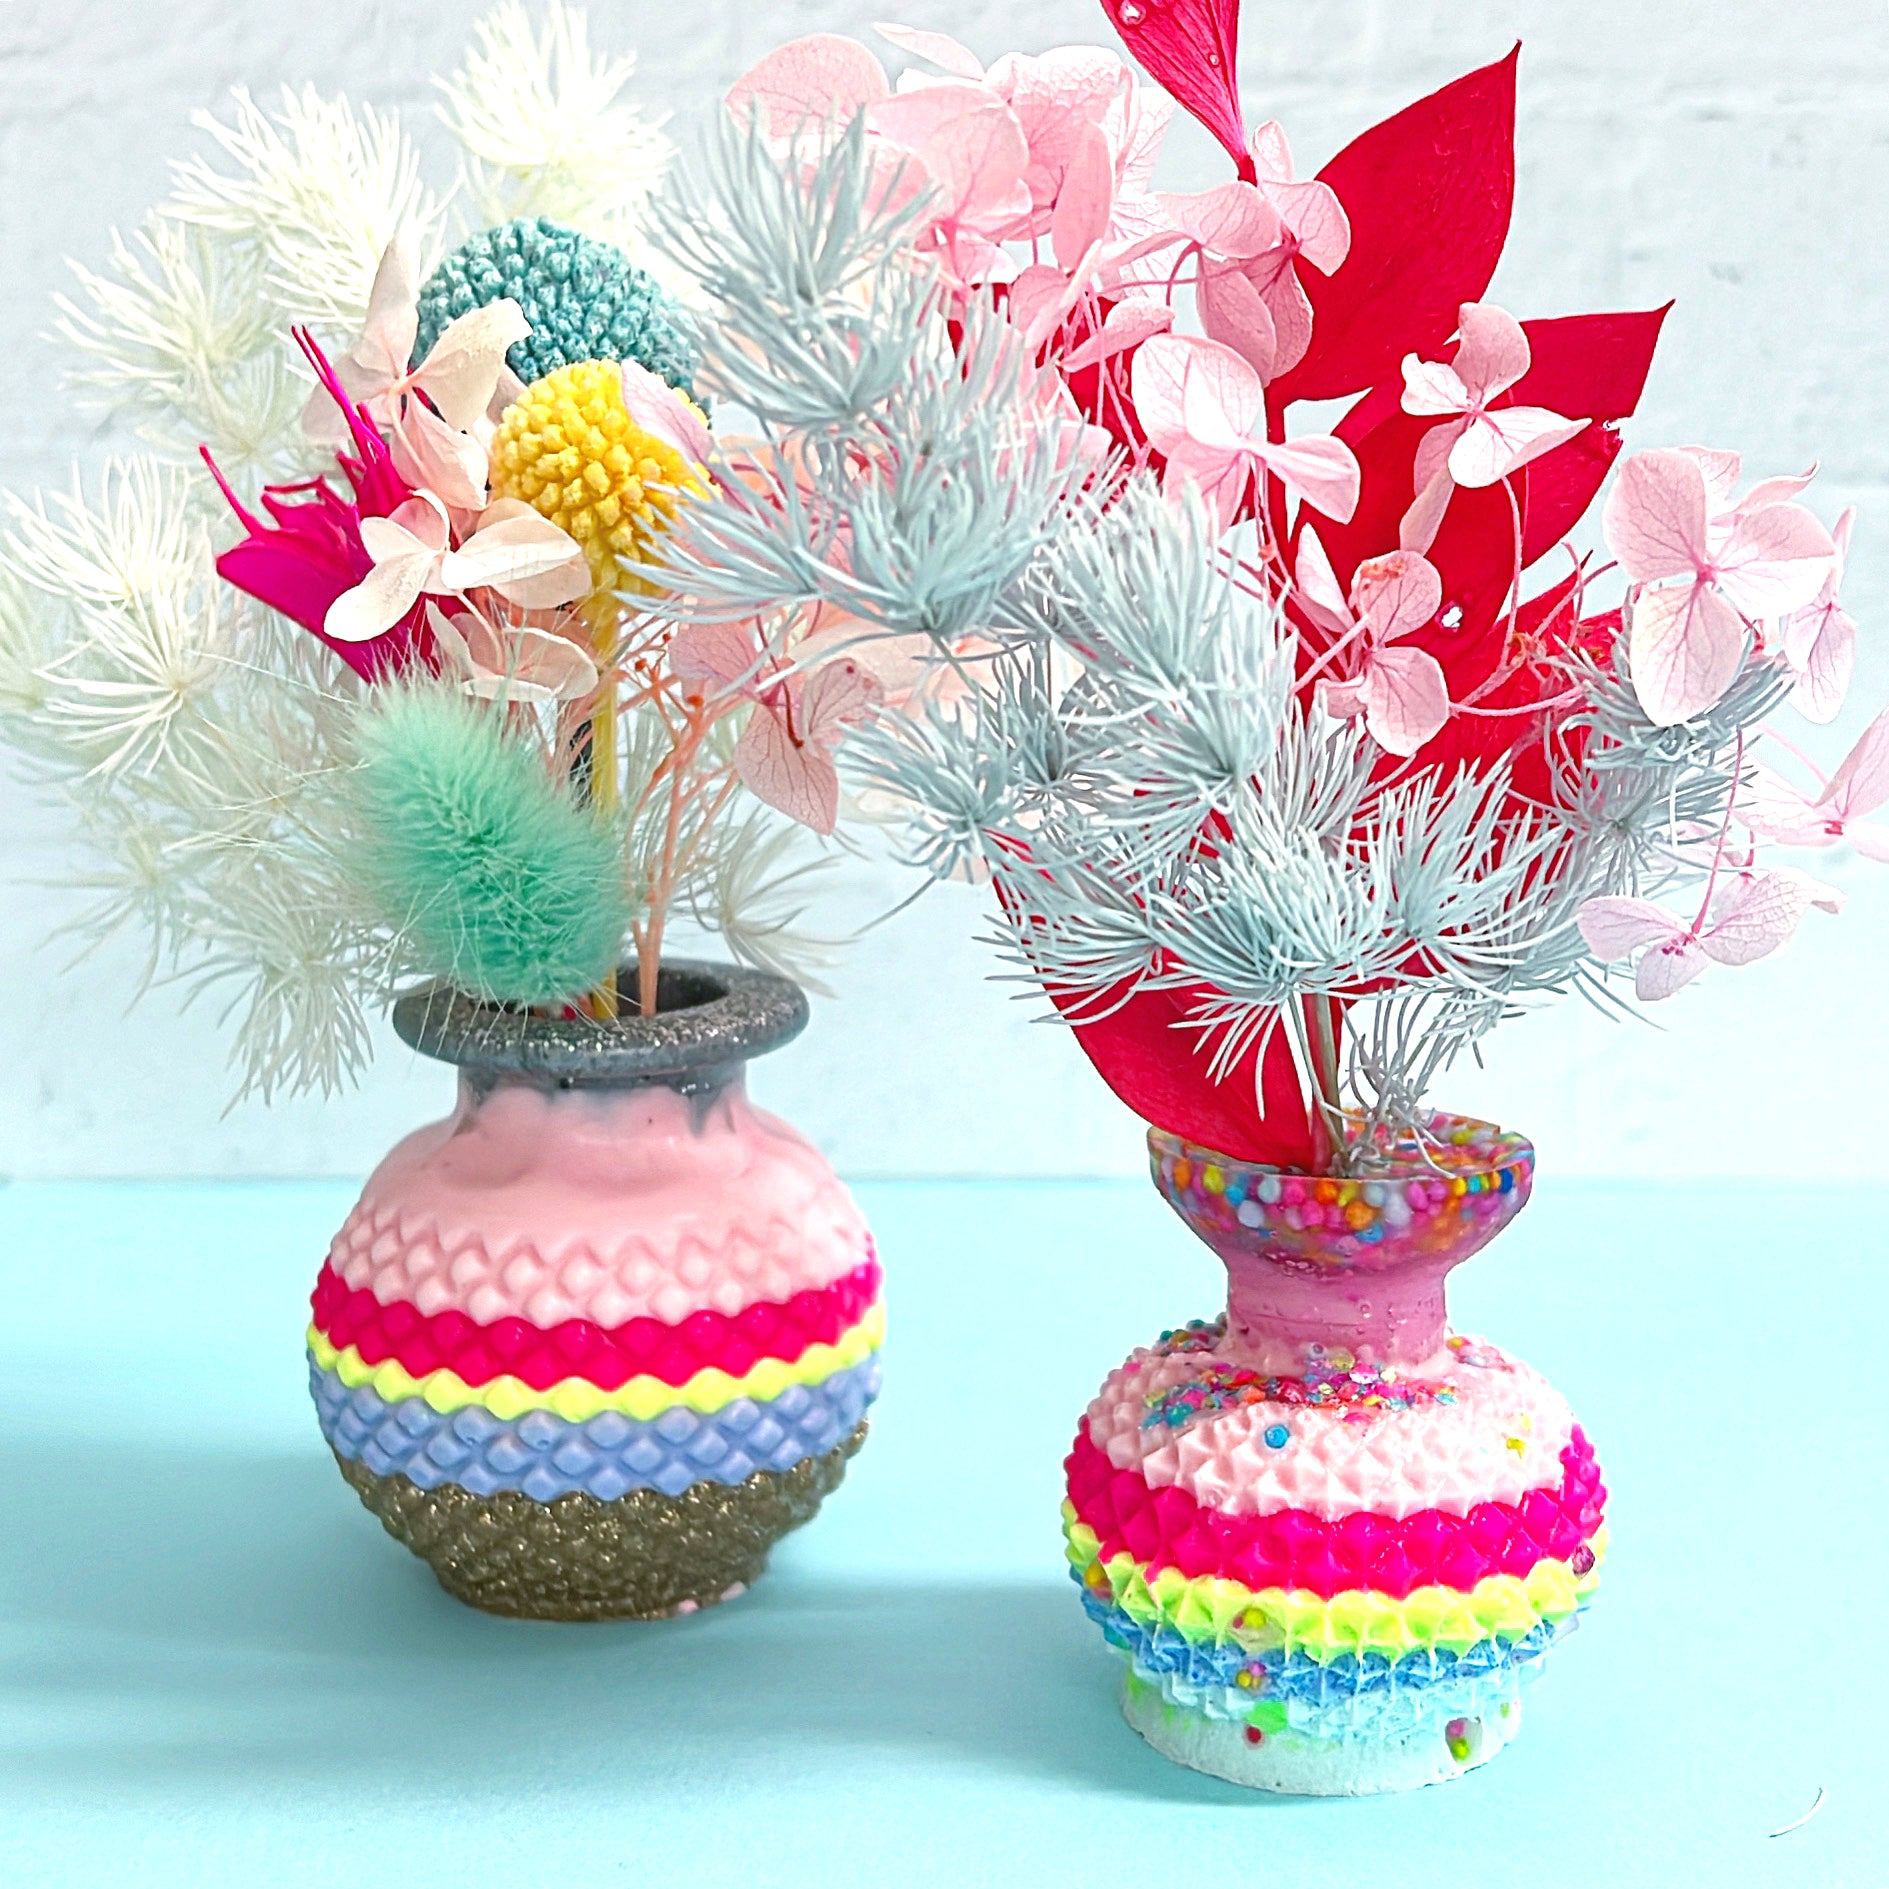 HELLO BABY VASES : ROUNDED : Choose your design : One of a Kind Cast Resin Vases